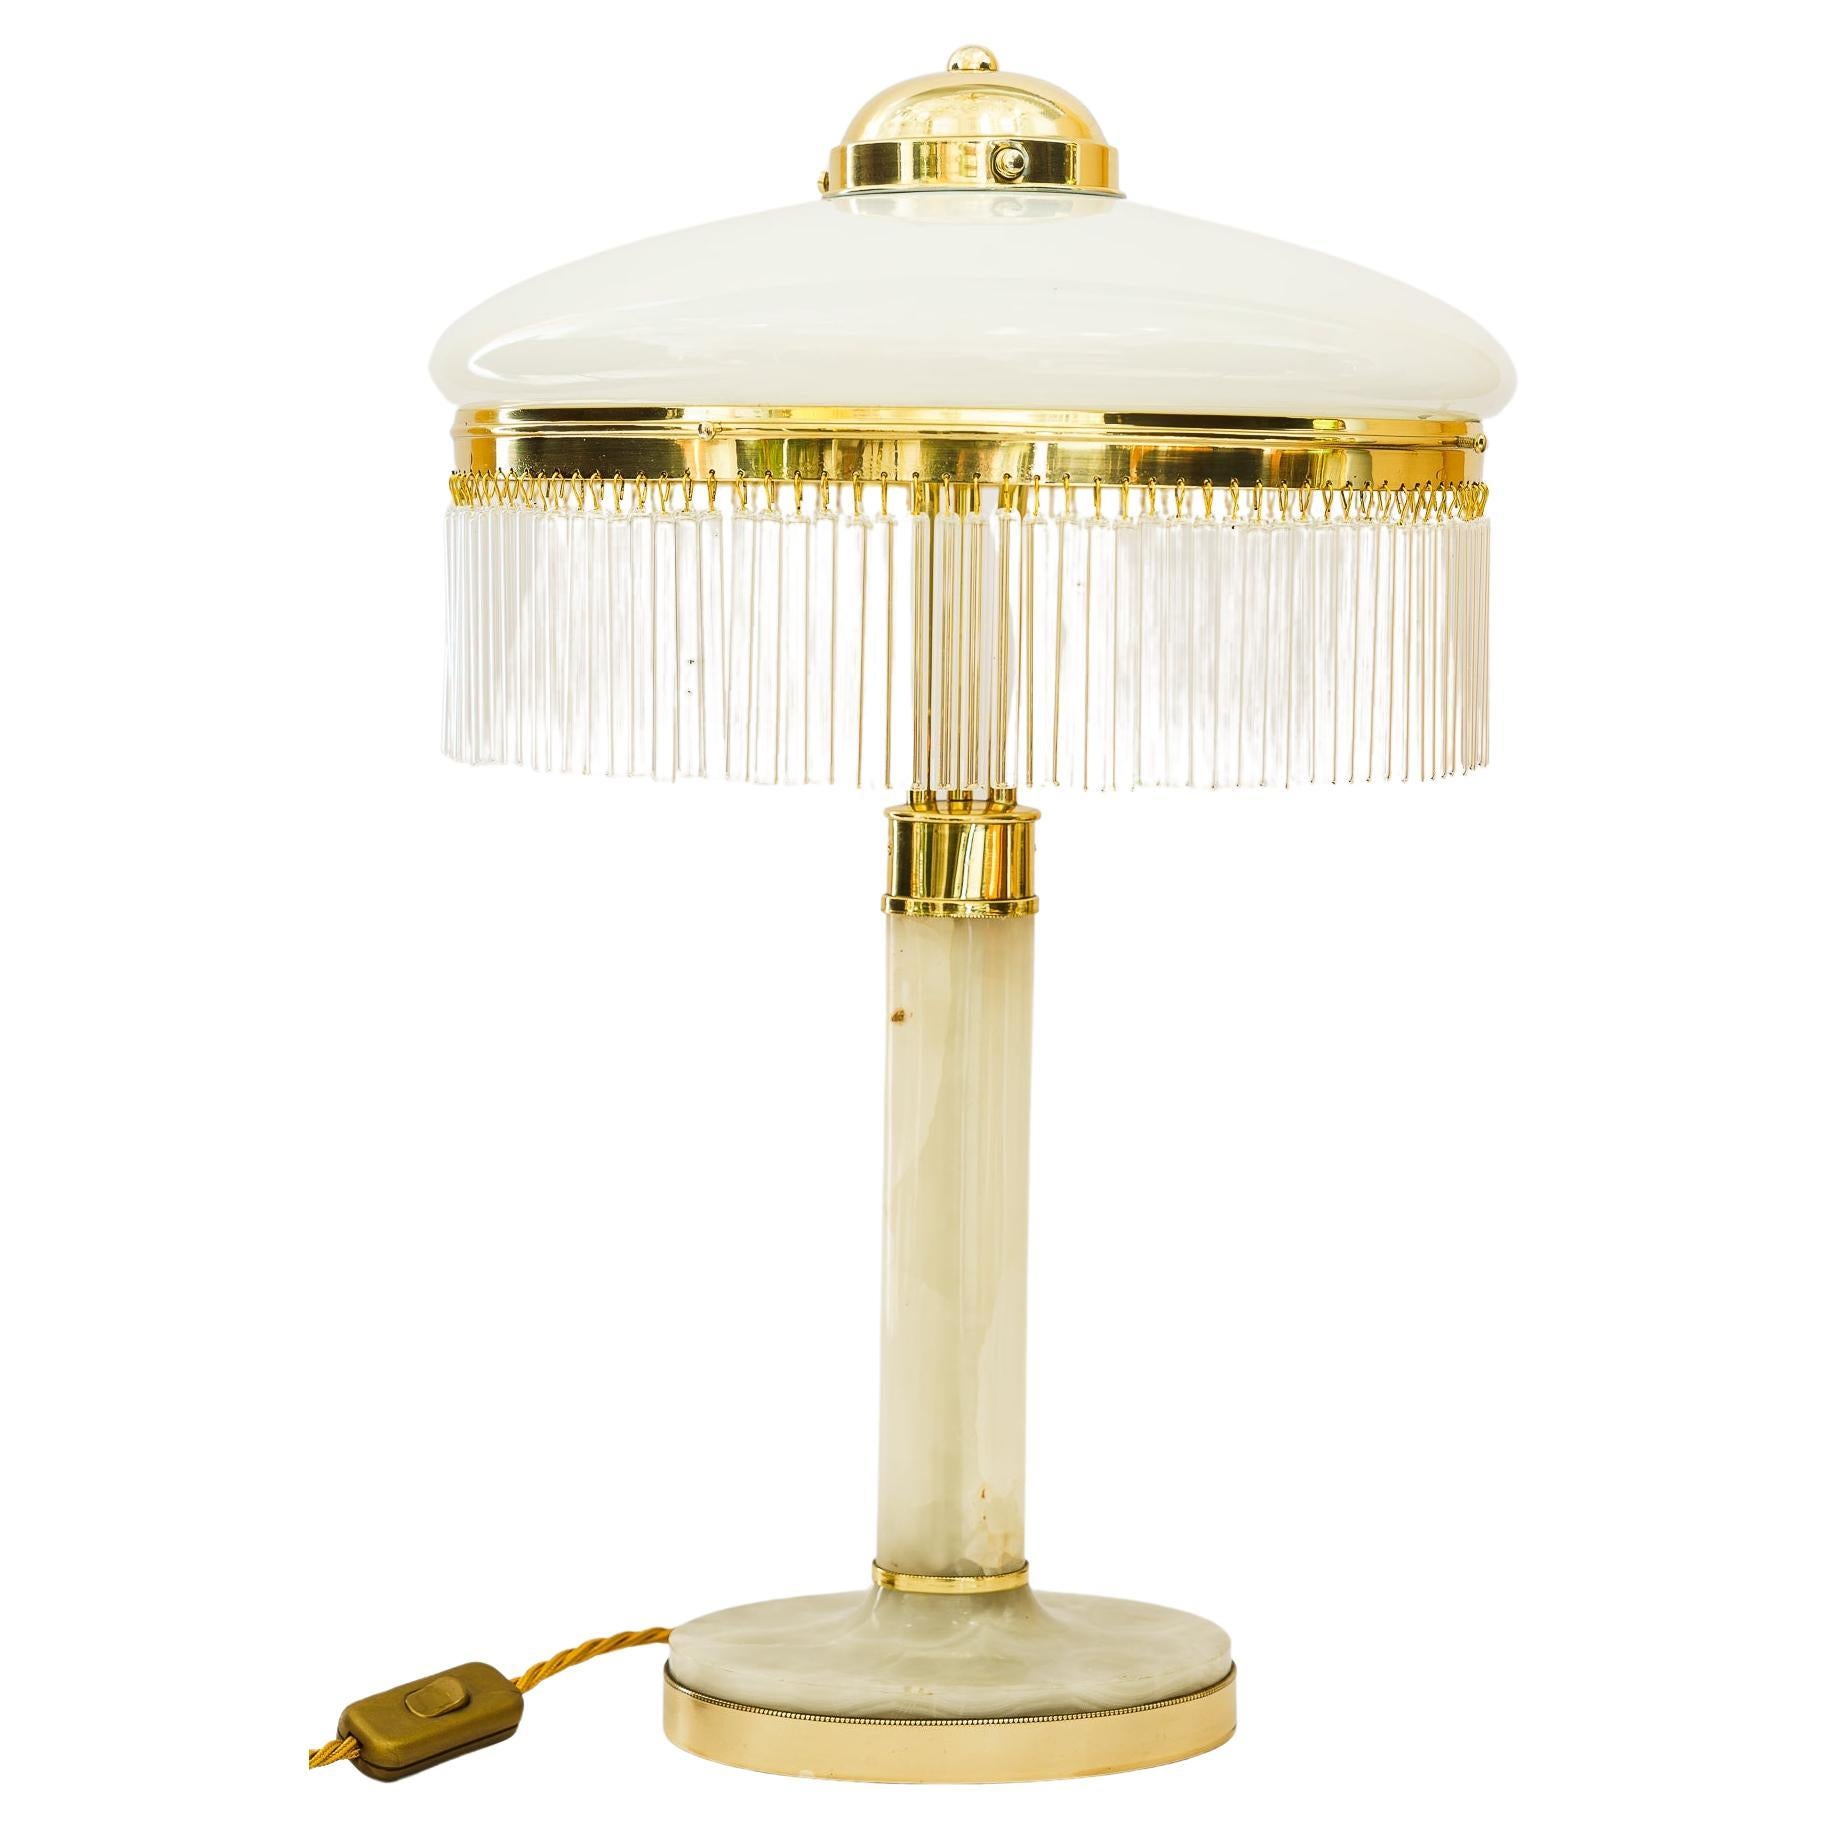 Art Deco Brass and Marble Table lamp with opal glass shade and glass sticks 1920